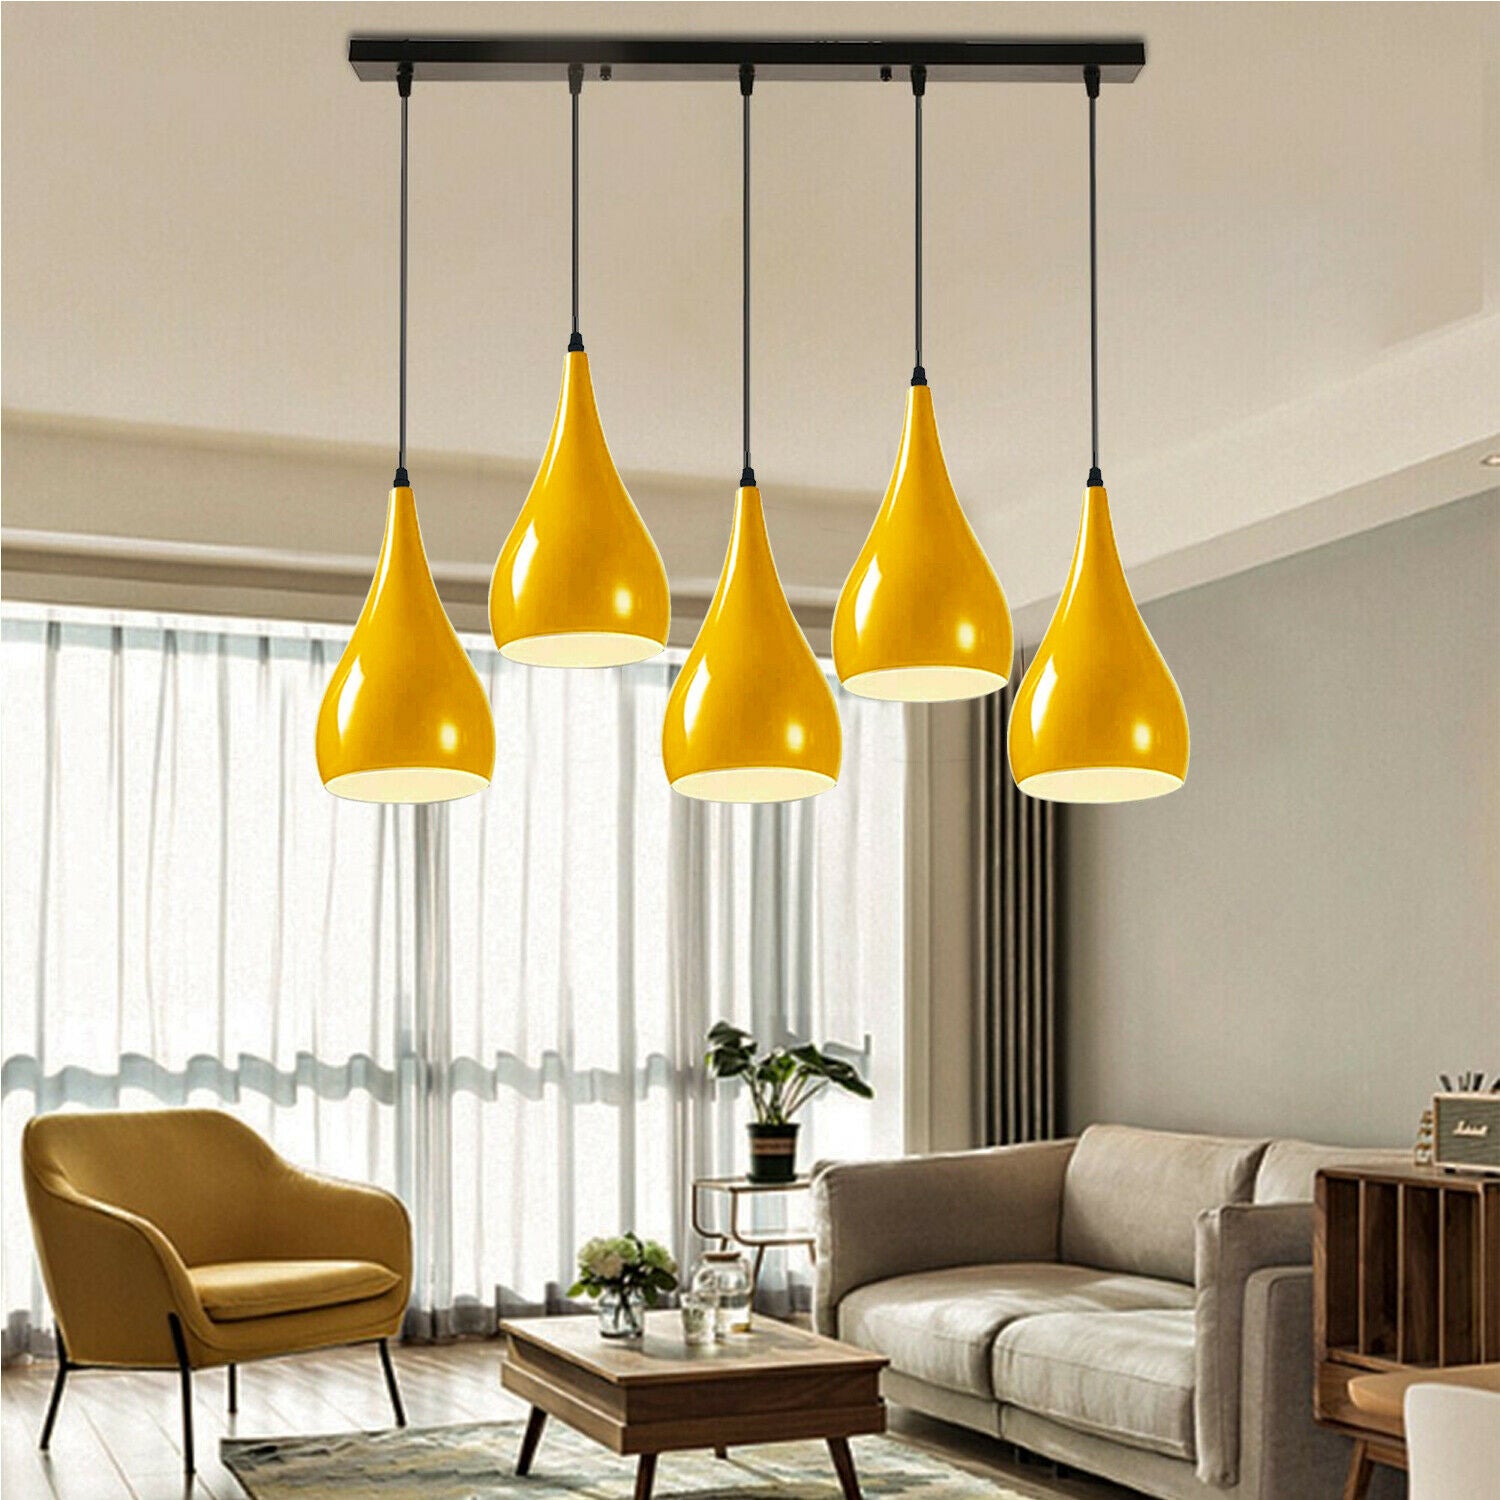 Yellow 5 Outlet Ceiling Light Fixtures